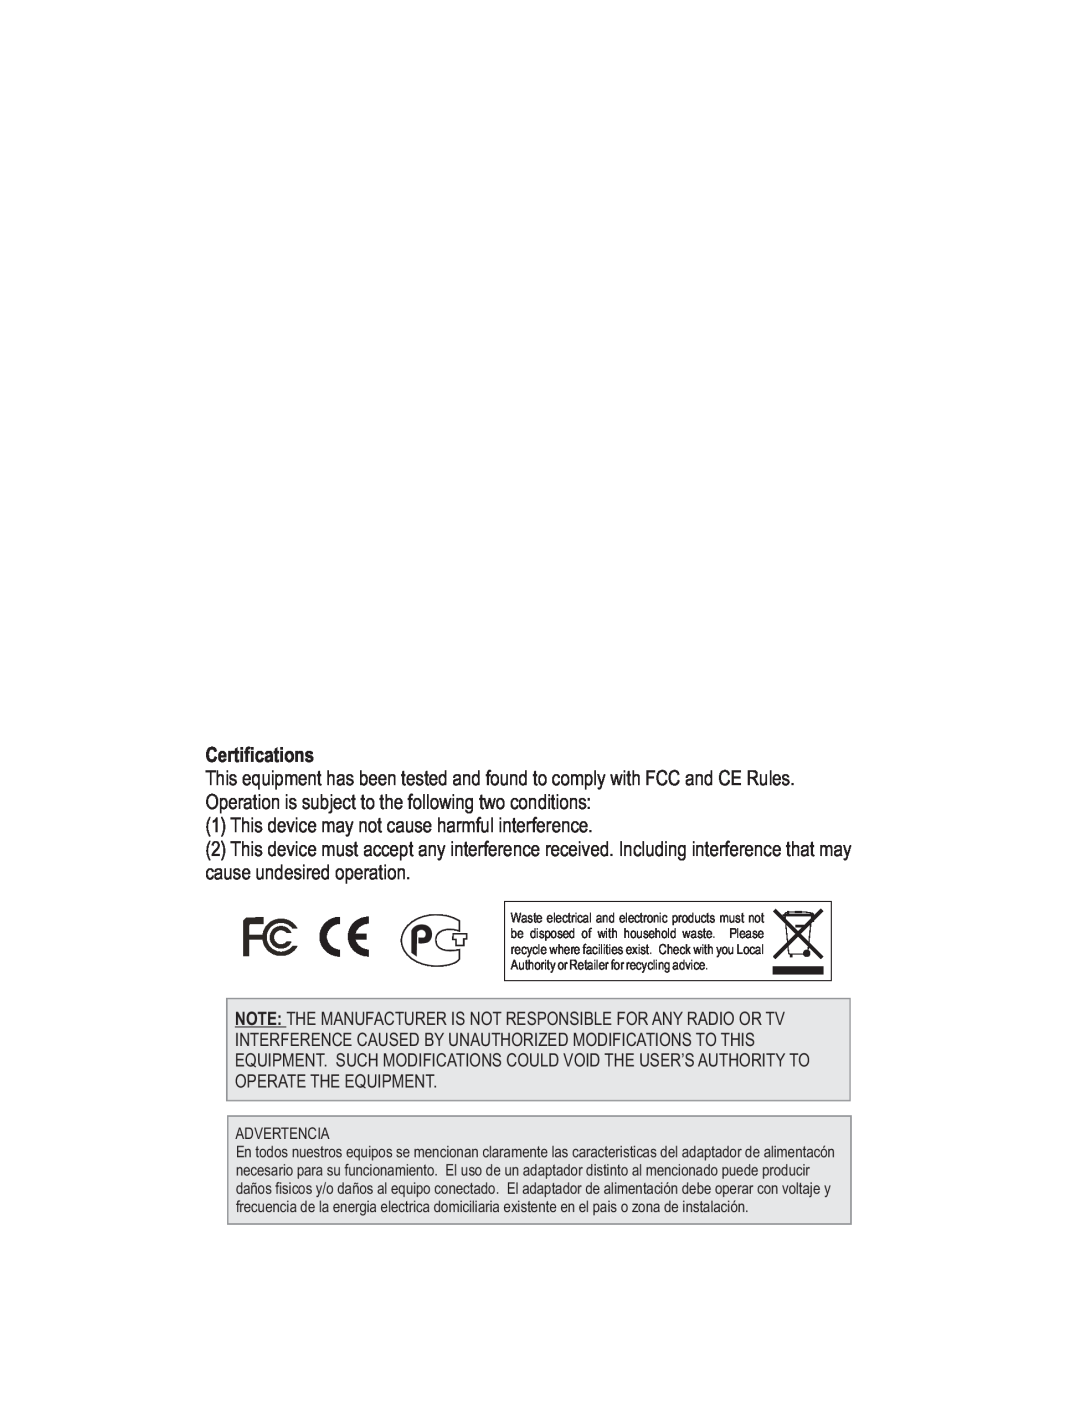 TRENDnet TEW-672GR manual Certifications, This device may not cause harmful interference 